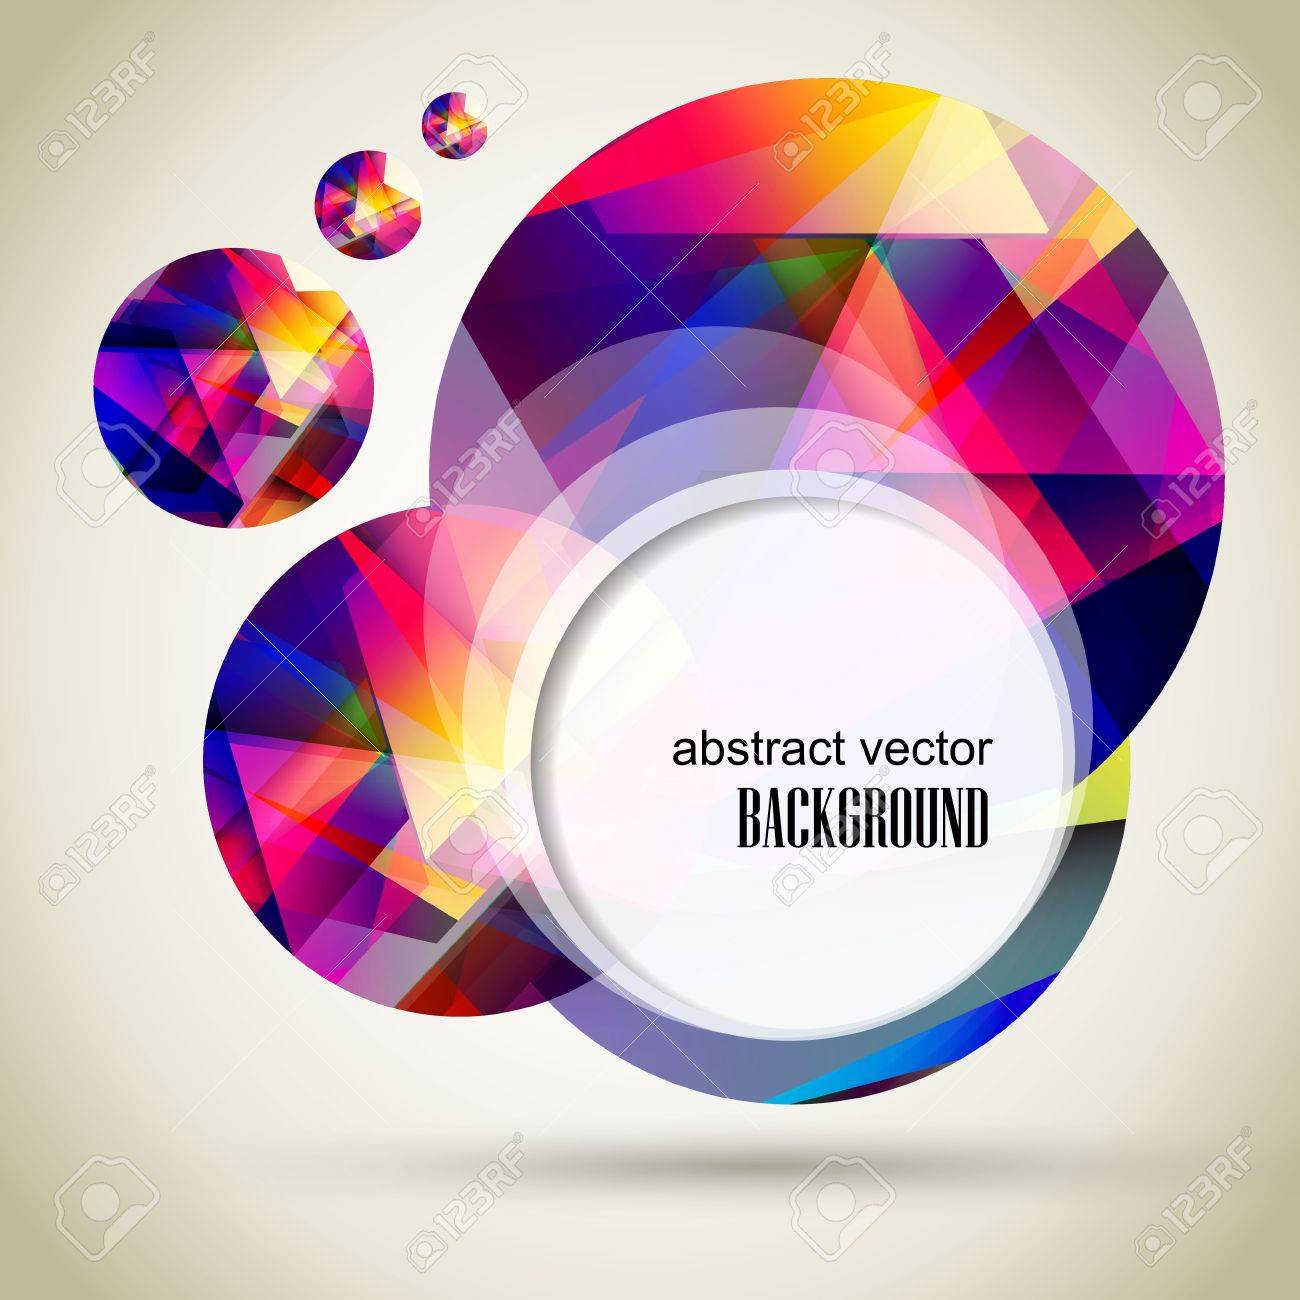 Abstract Background For Layout Design Web Info Graphic Royalty